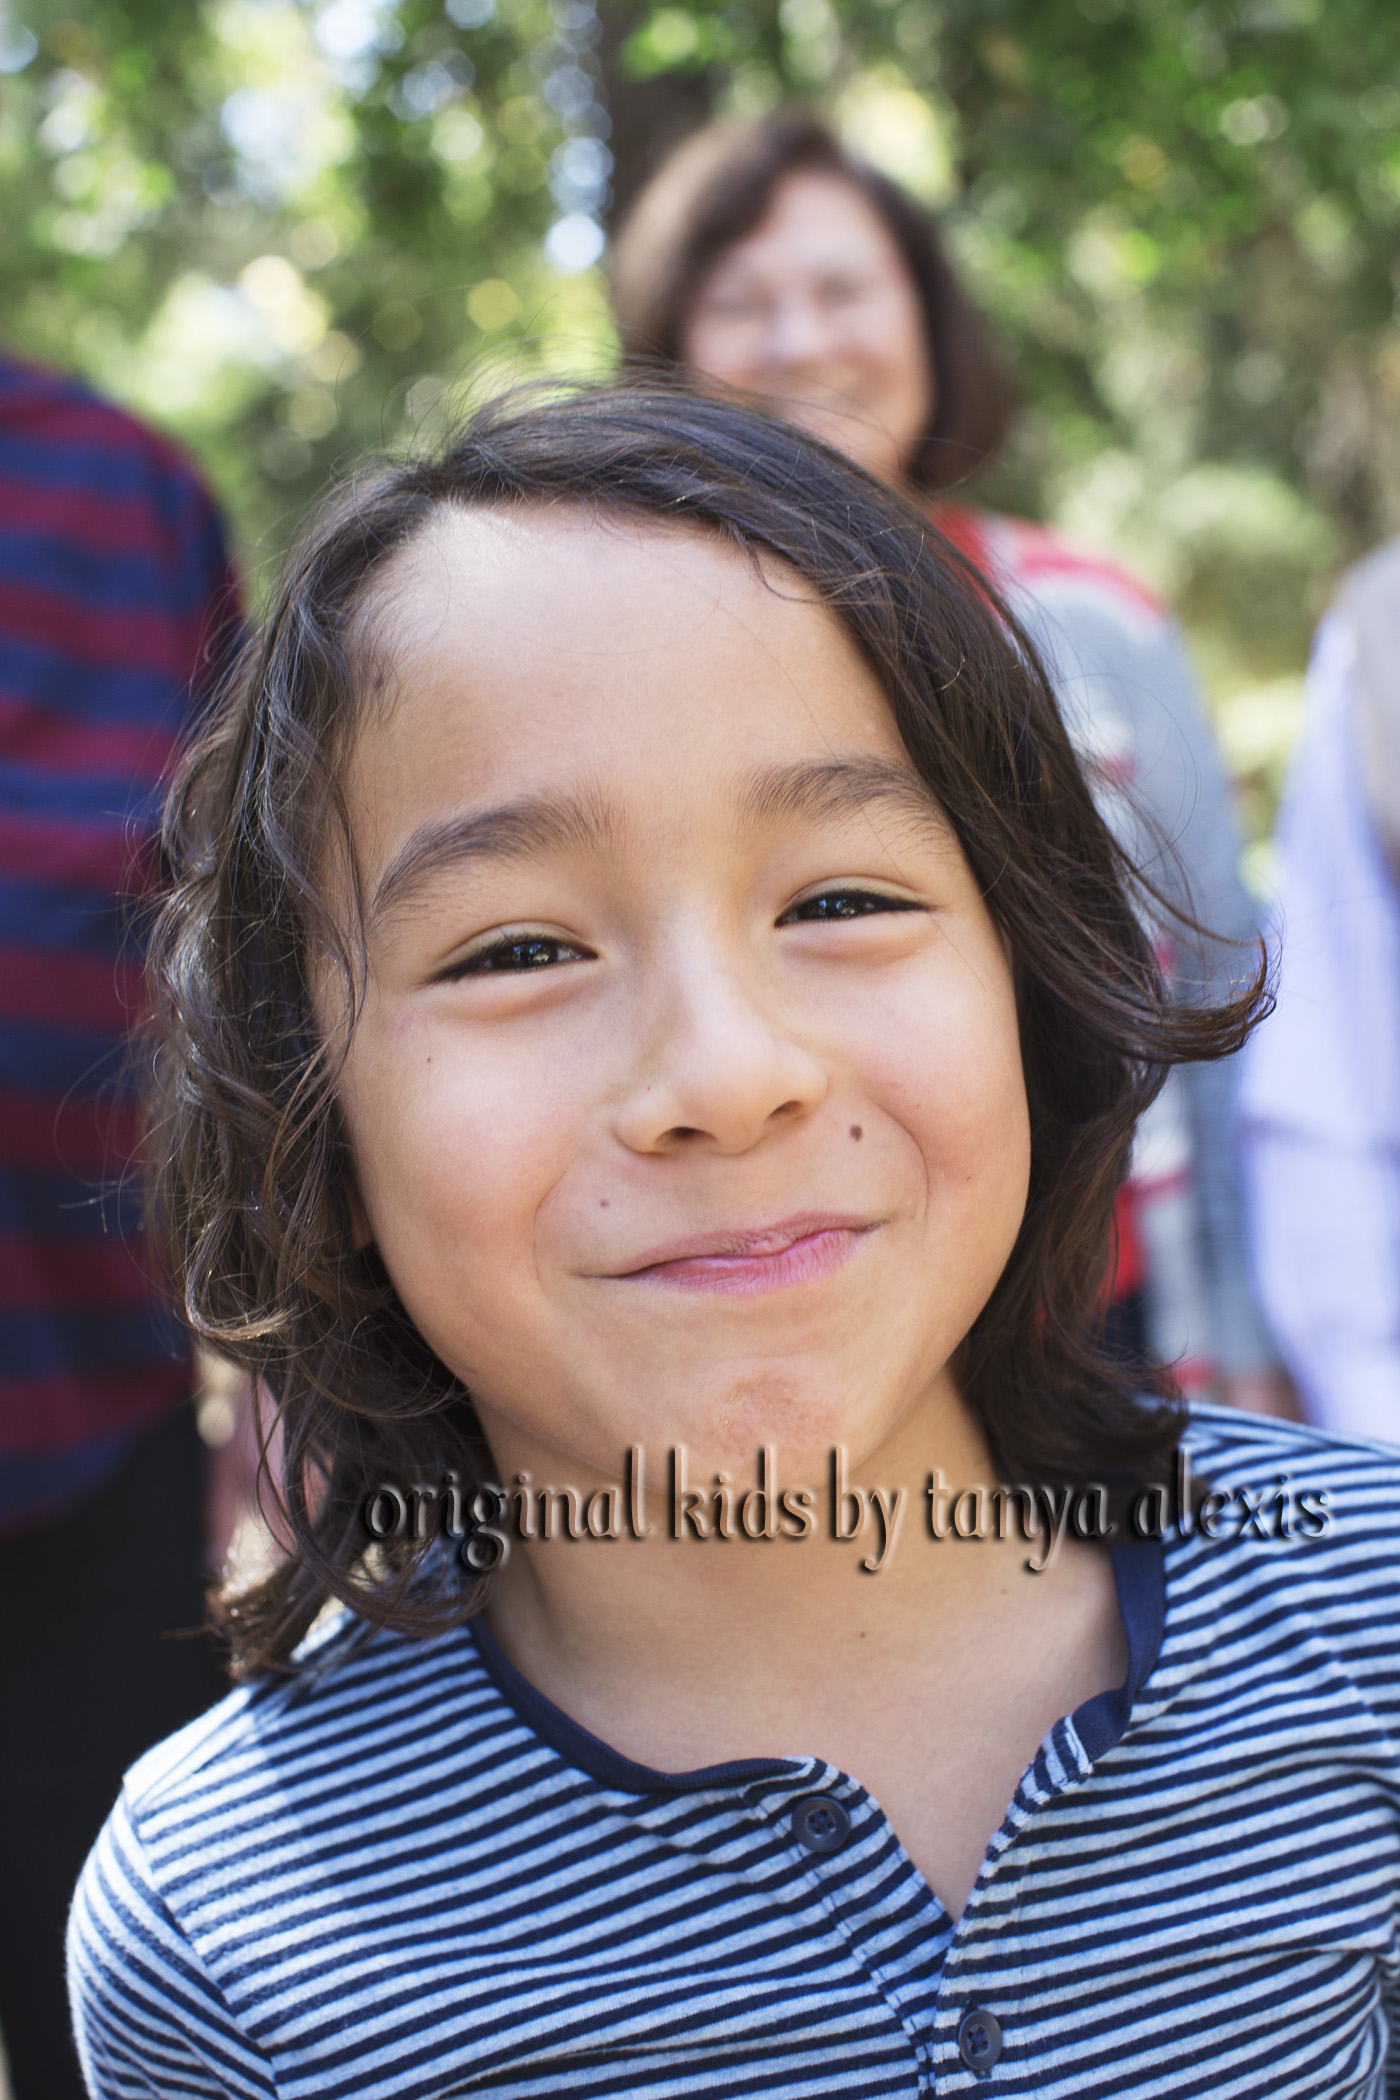 los angeles family photographer | original kids by tanya alexis